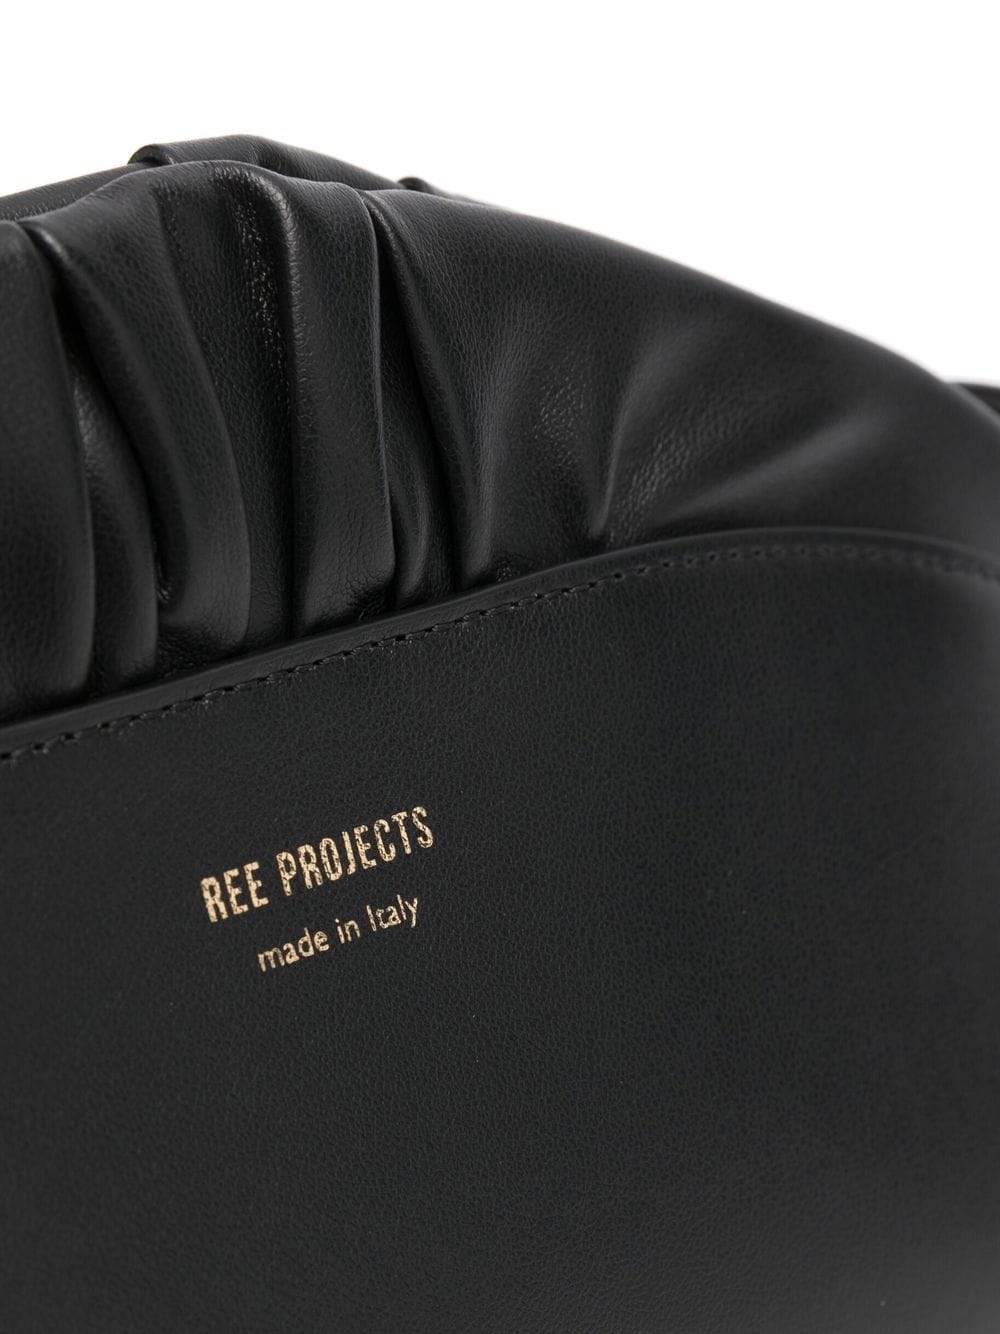 Ree Projects REE PROJECTS- Ann Baguette Leather Handbag